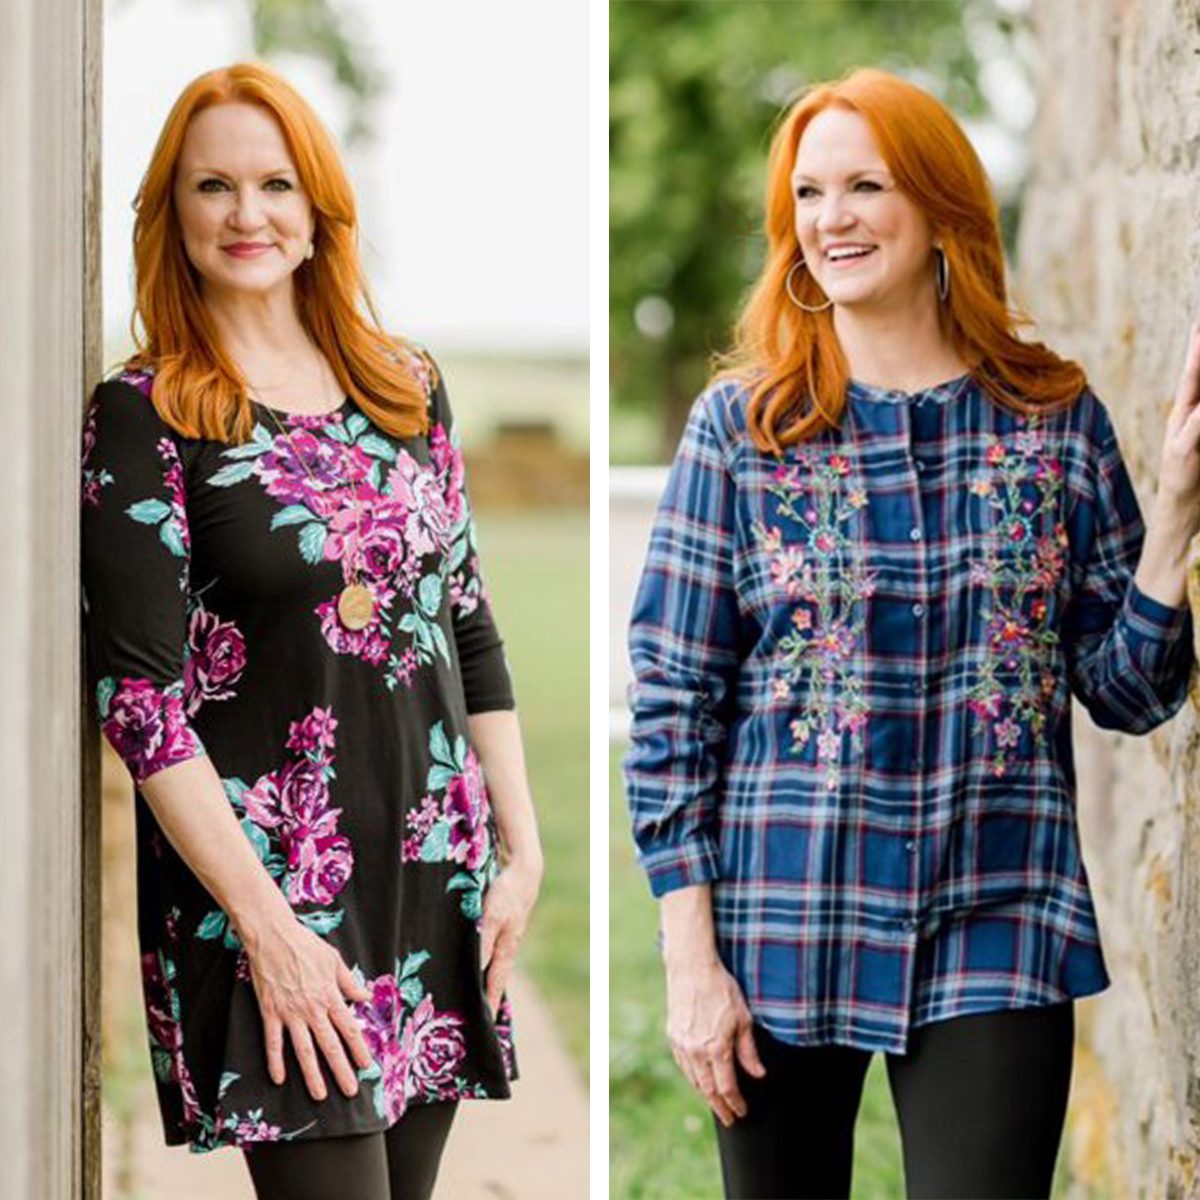 Ree Drummond's new Pioneer Woman fashion line just dropped